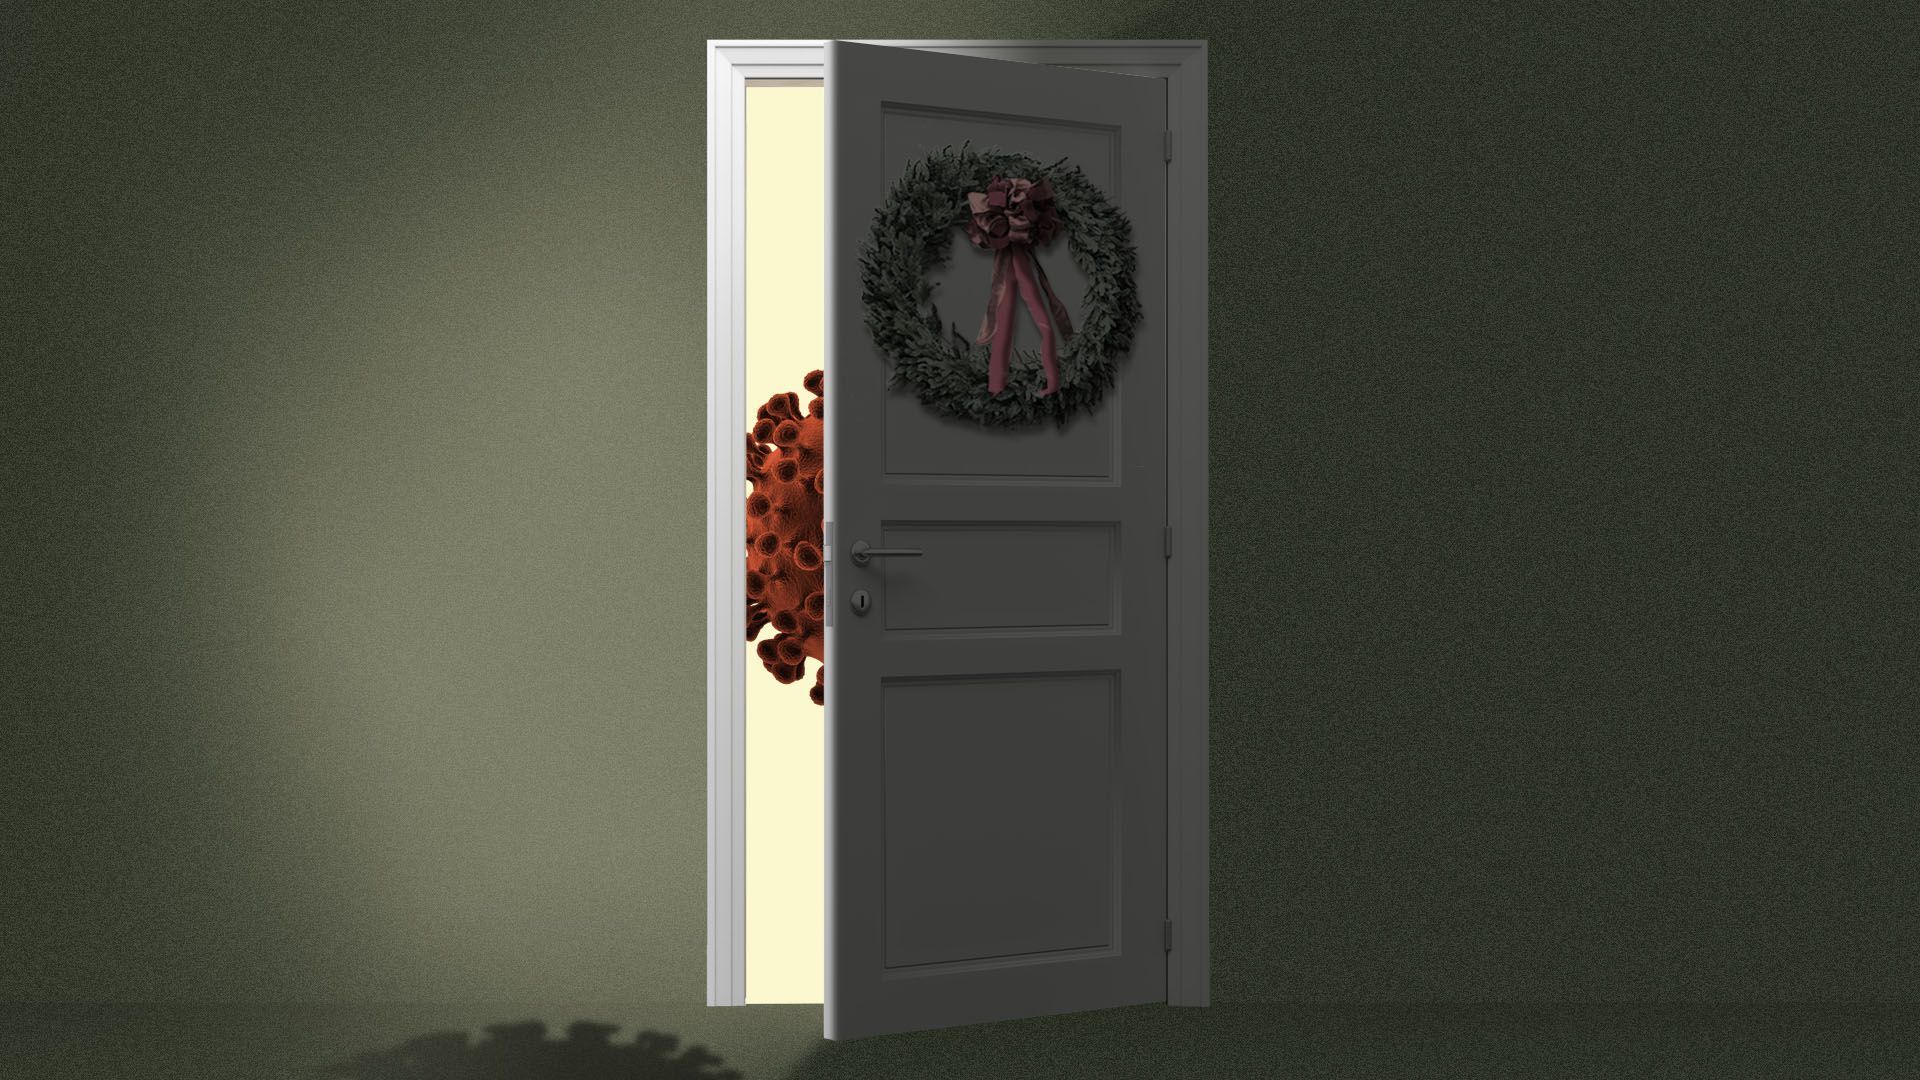 Illustration of an open door with a virus on the other side of it